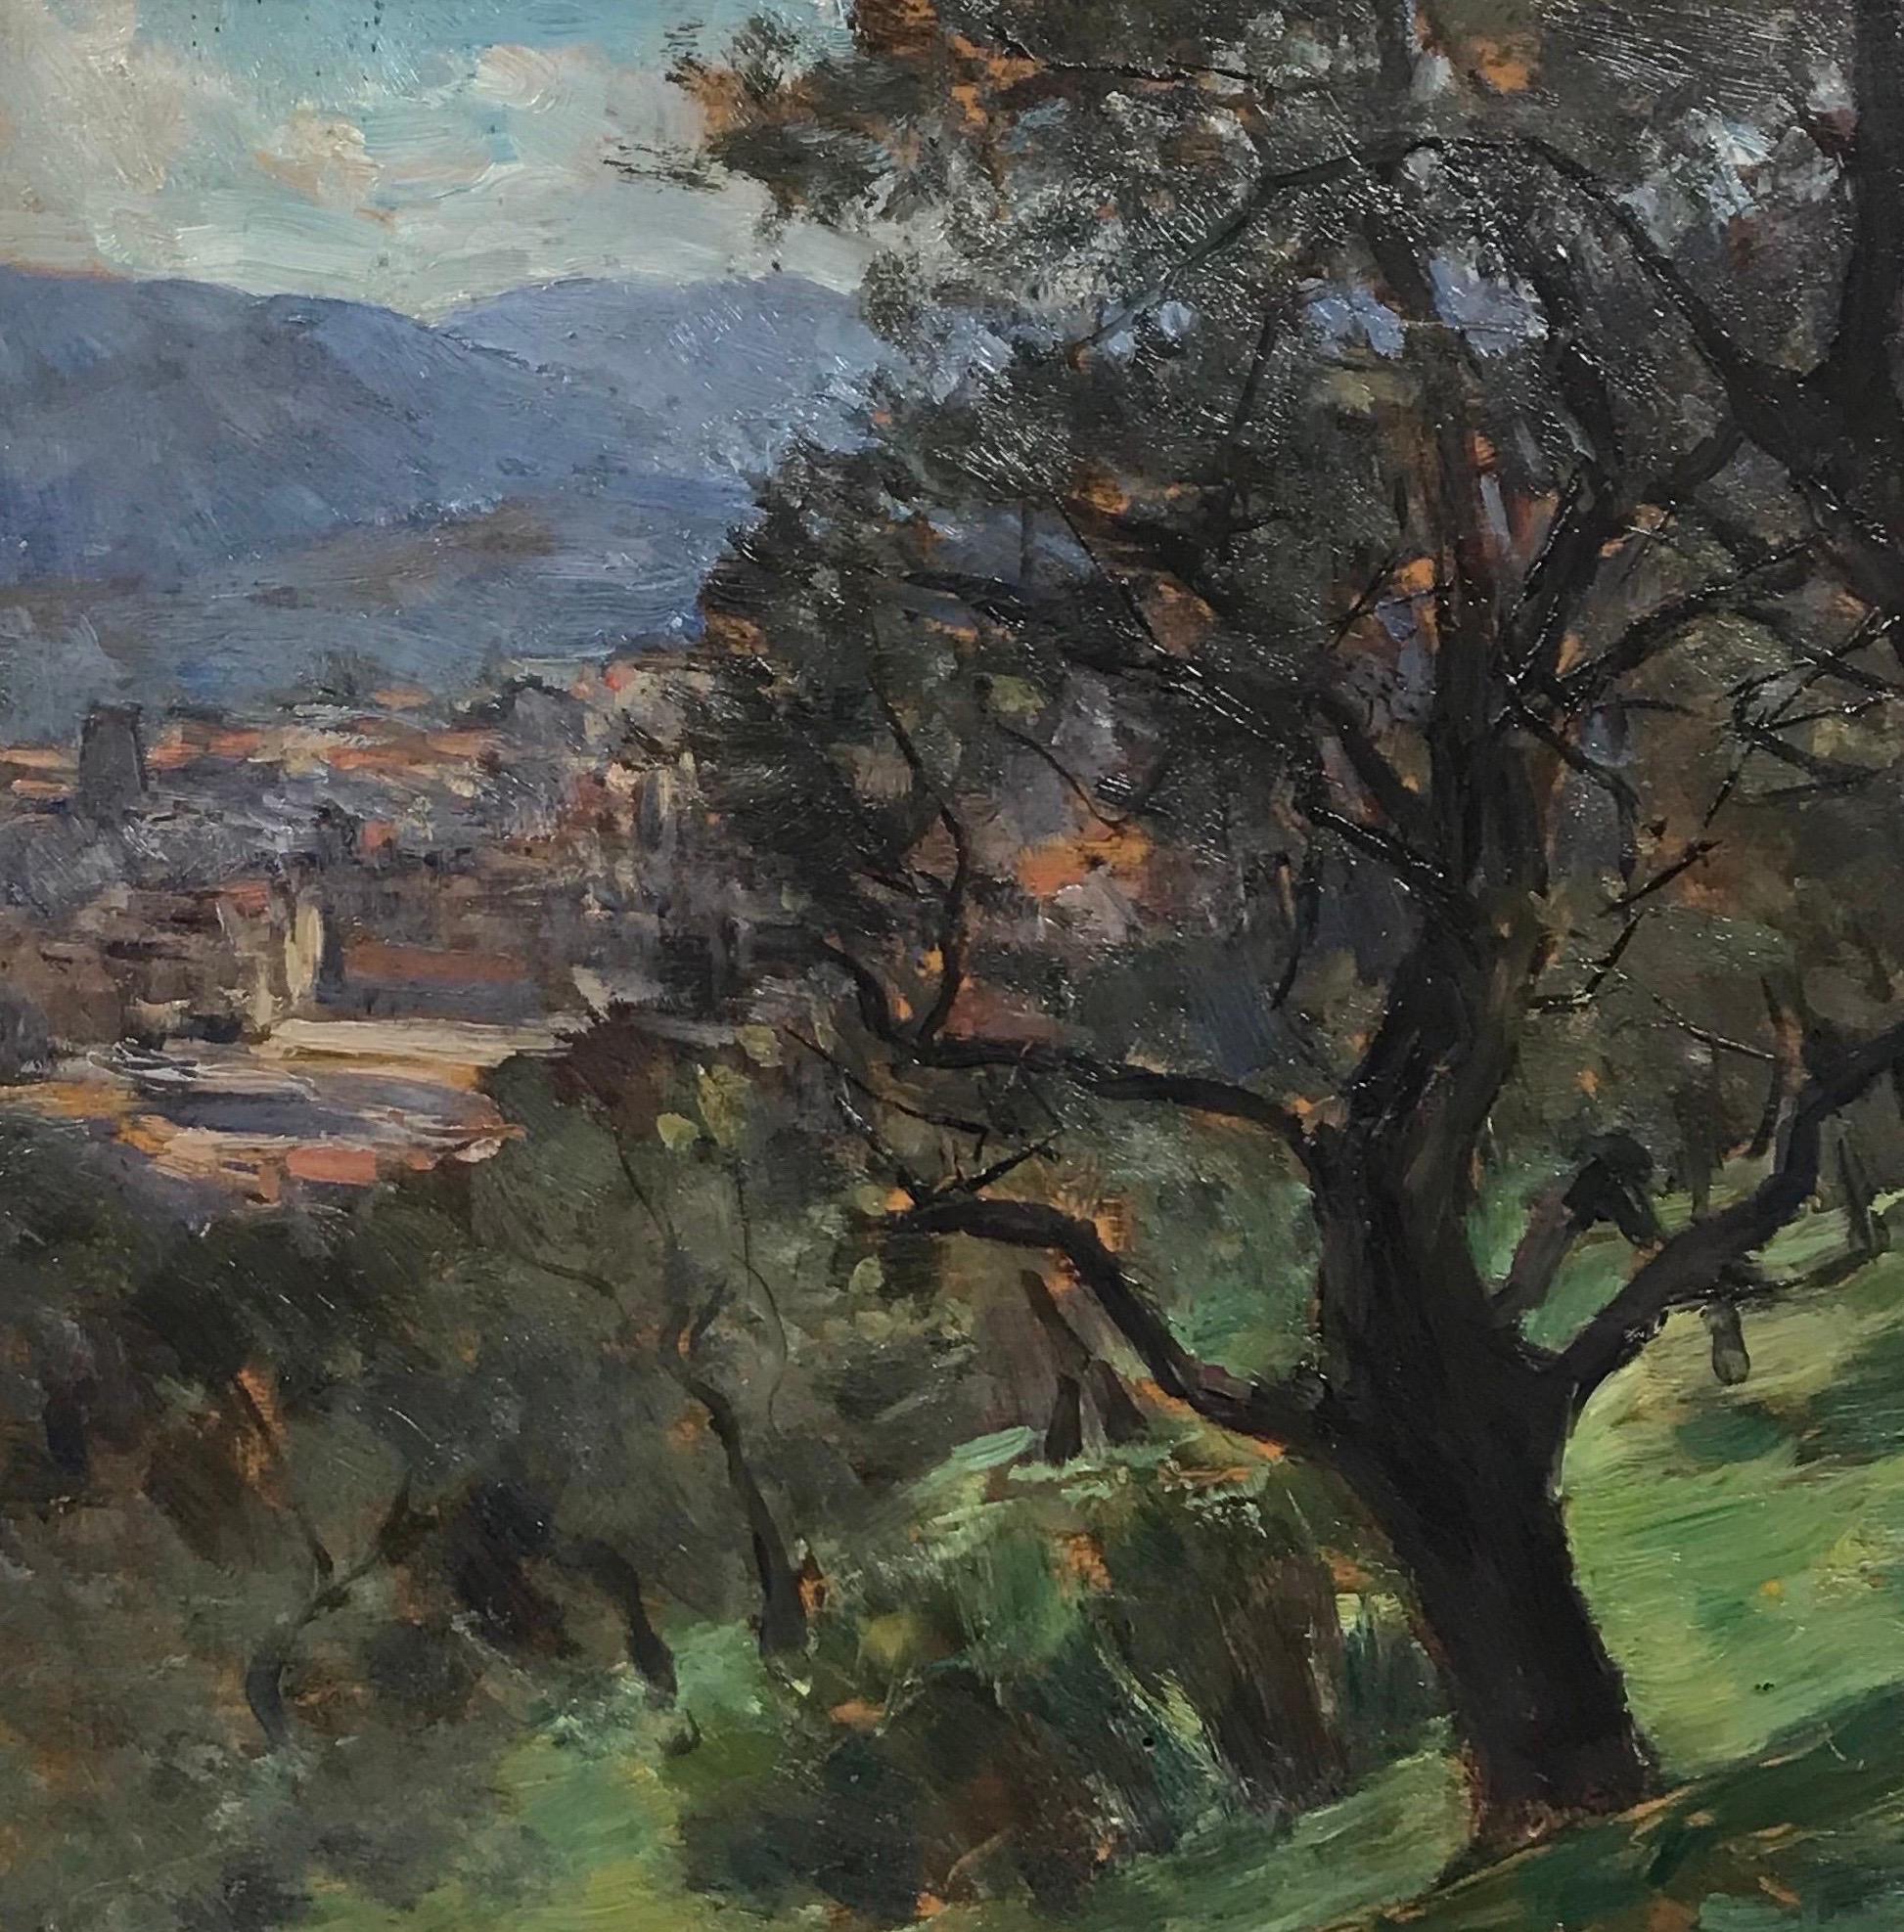 Artist/ School: French School, circa 1930's

Title: Provencal Landscape view through trees

Medium: oil on board, framed

Framed: 13.5 x 16.5 inches
Board: 10.5 x 13.75 inches

Provenance: private collection, France

Condition: The painting is in